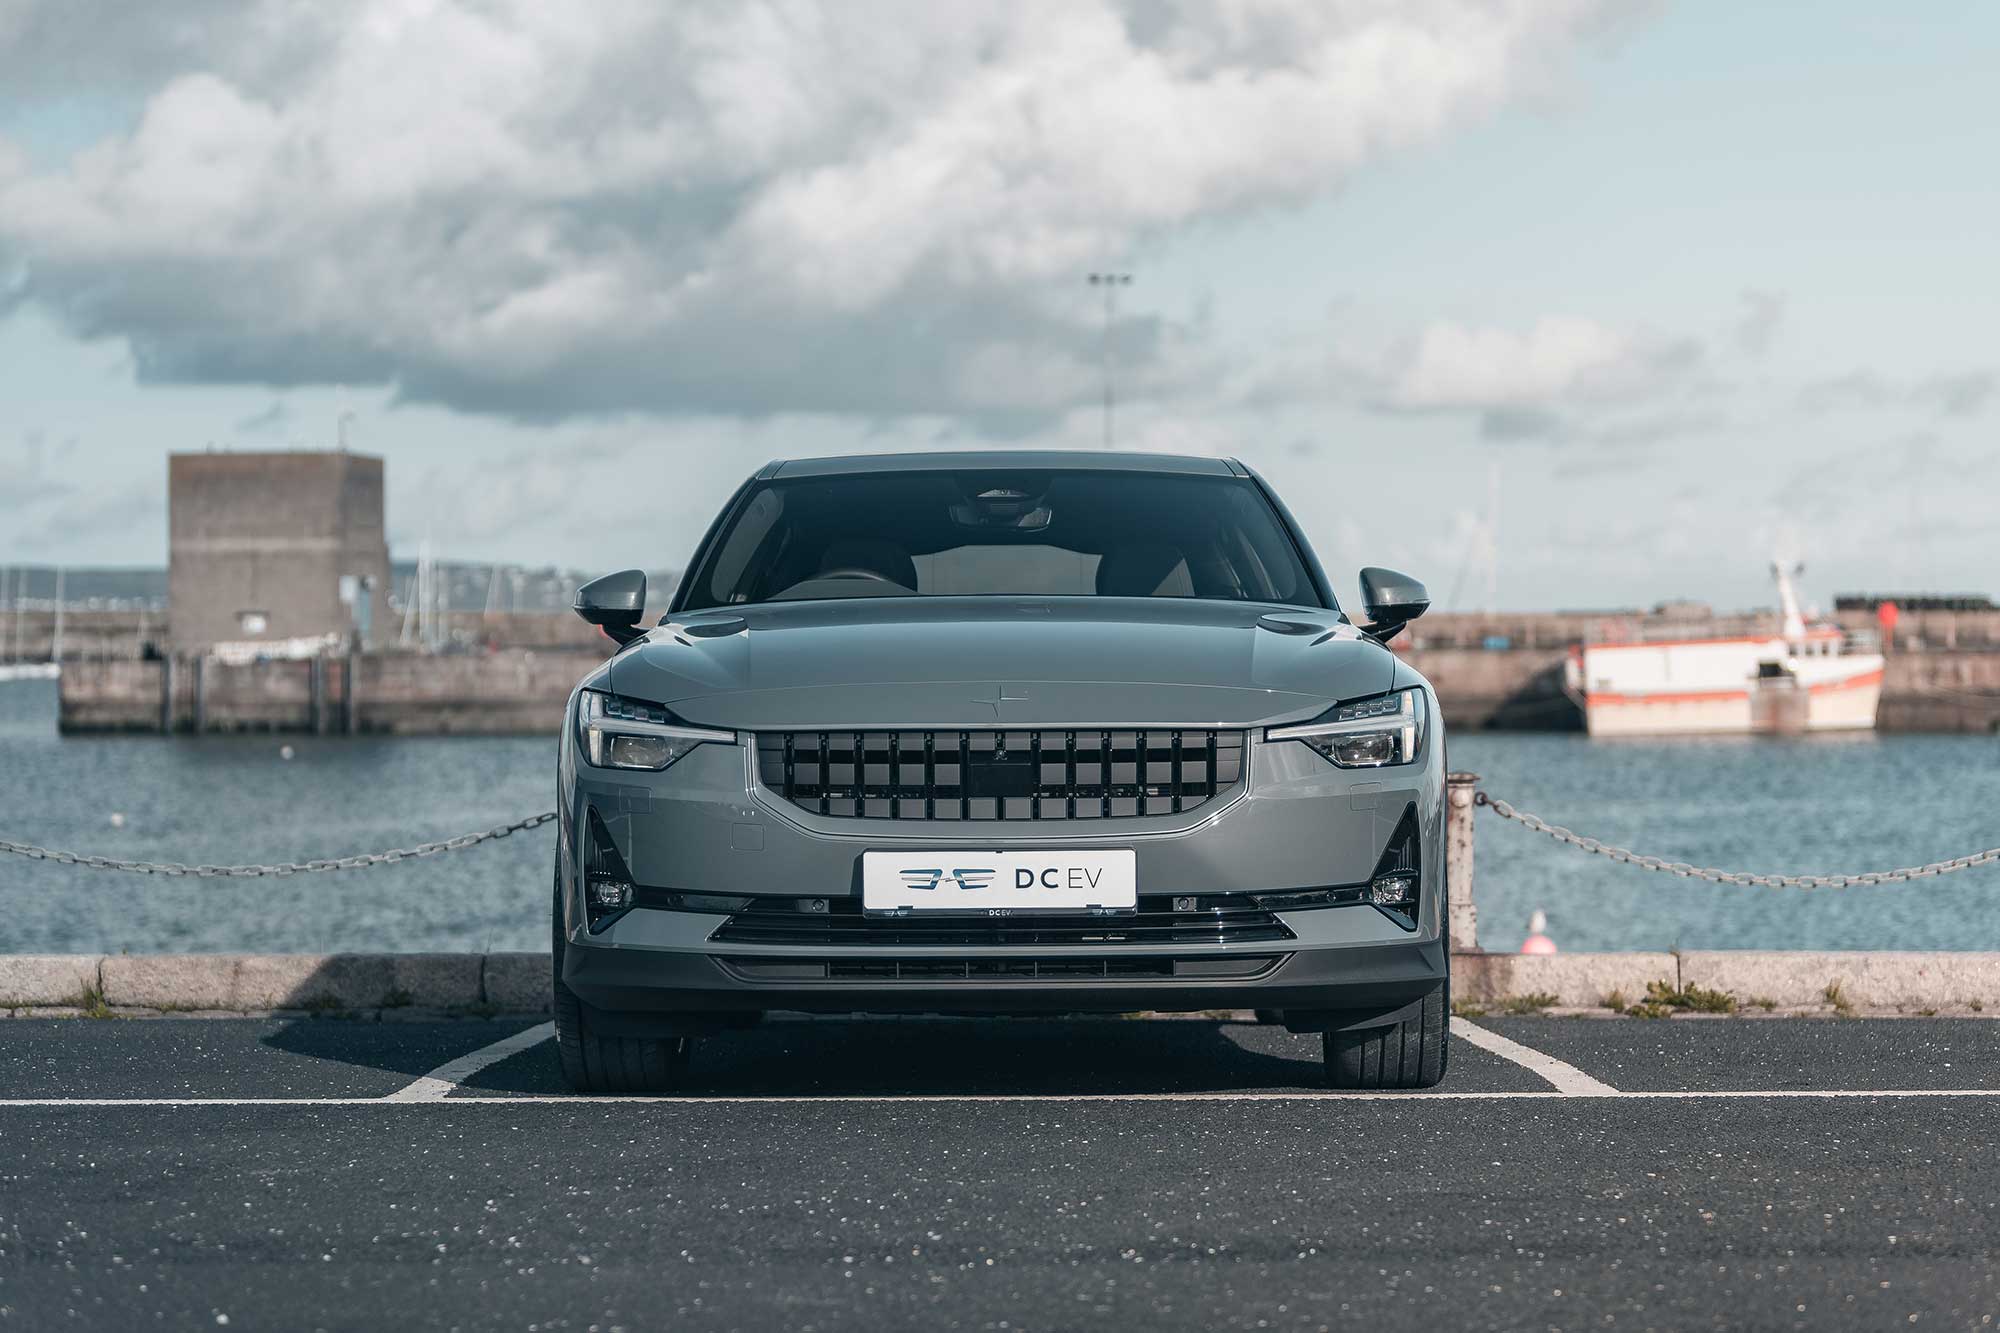 The front of Polestar 2